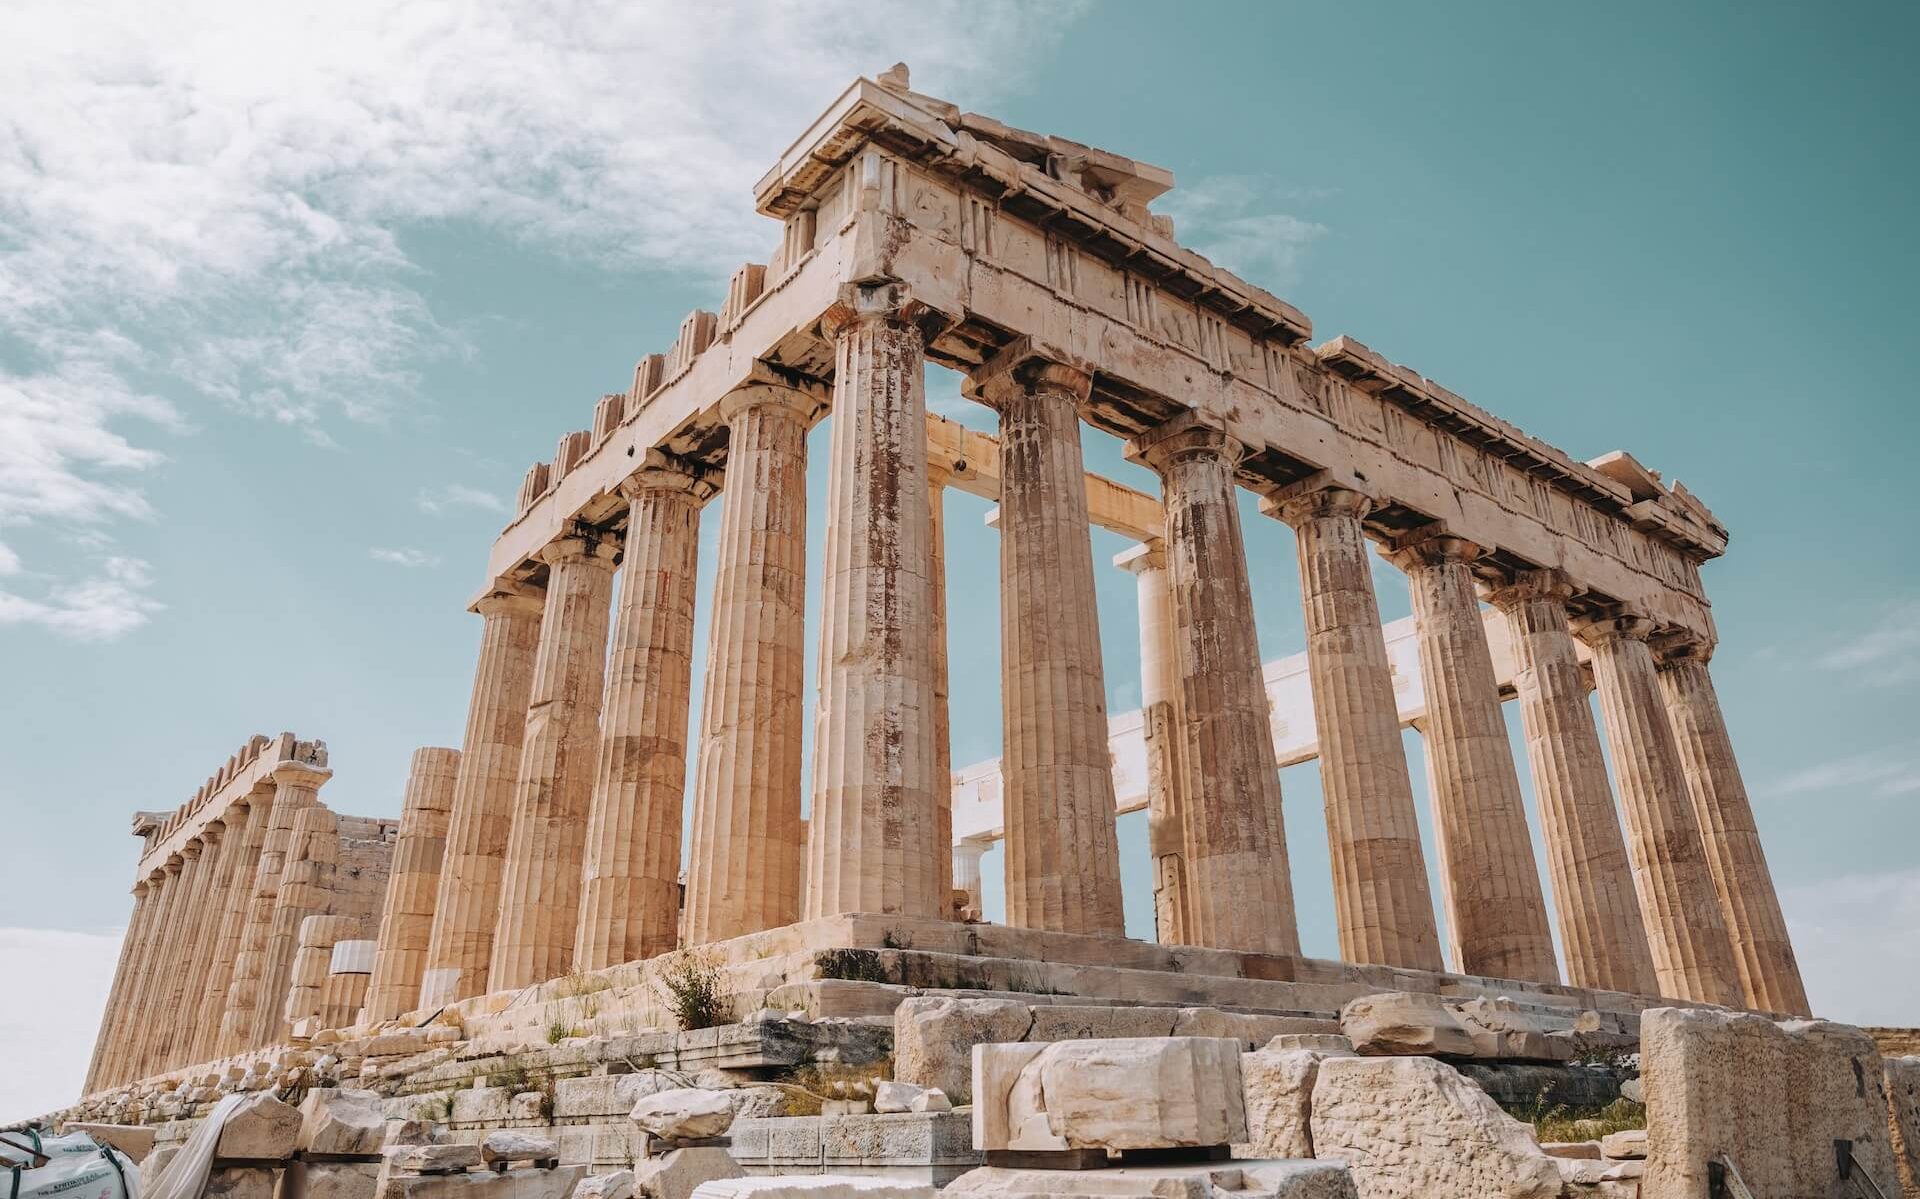 Standing atop the Acropolis of Athens, where iconic ancient structures like the Parthenon and the Erechtheion still command attention.